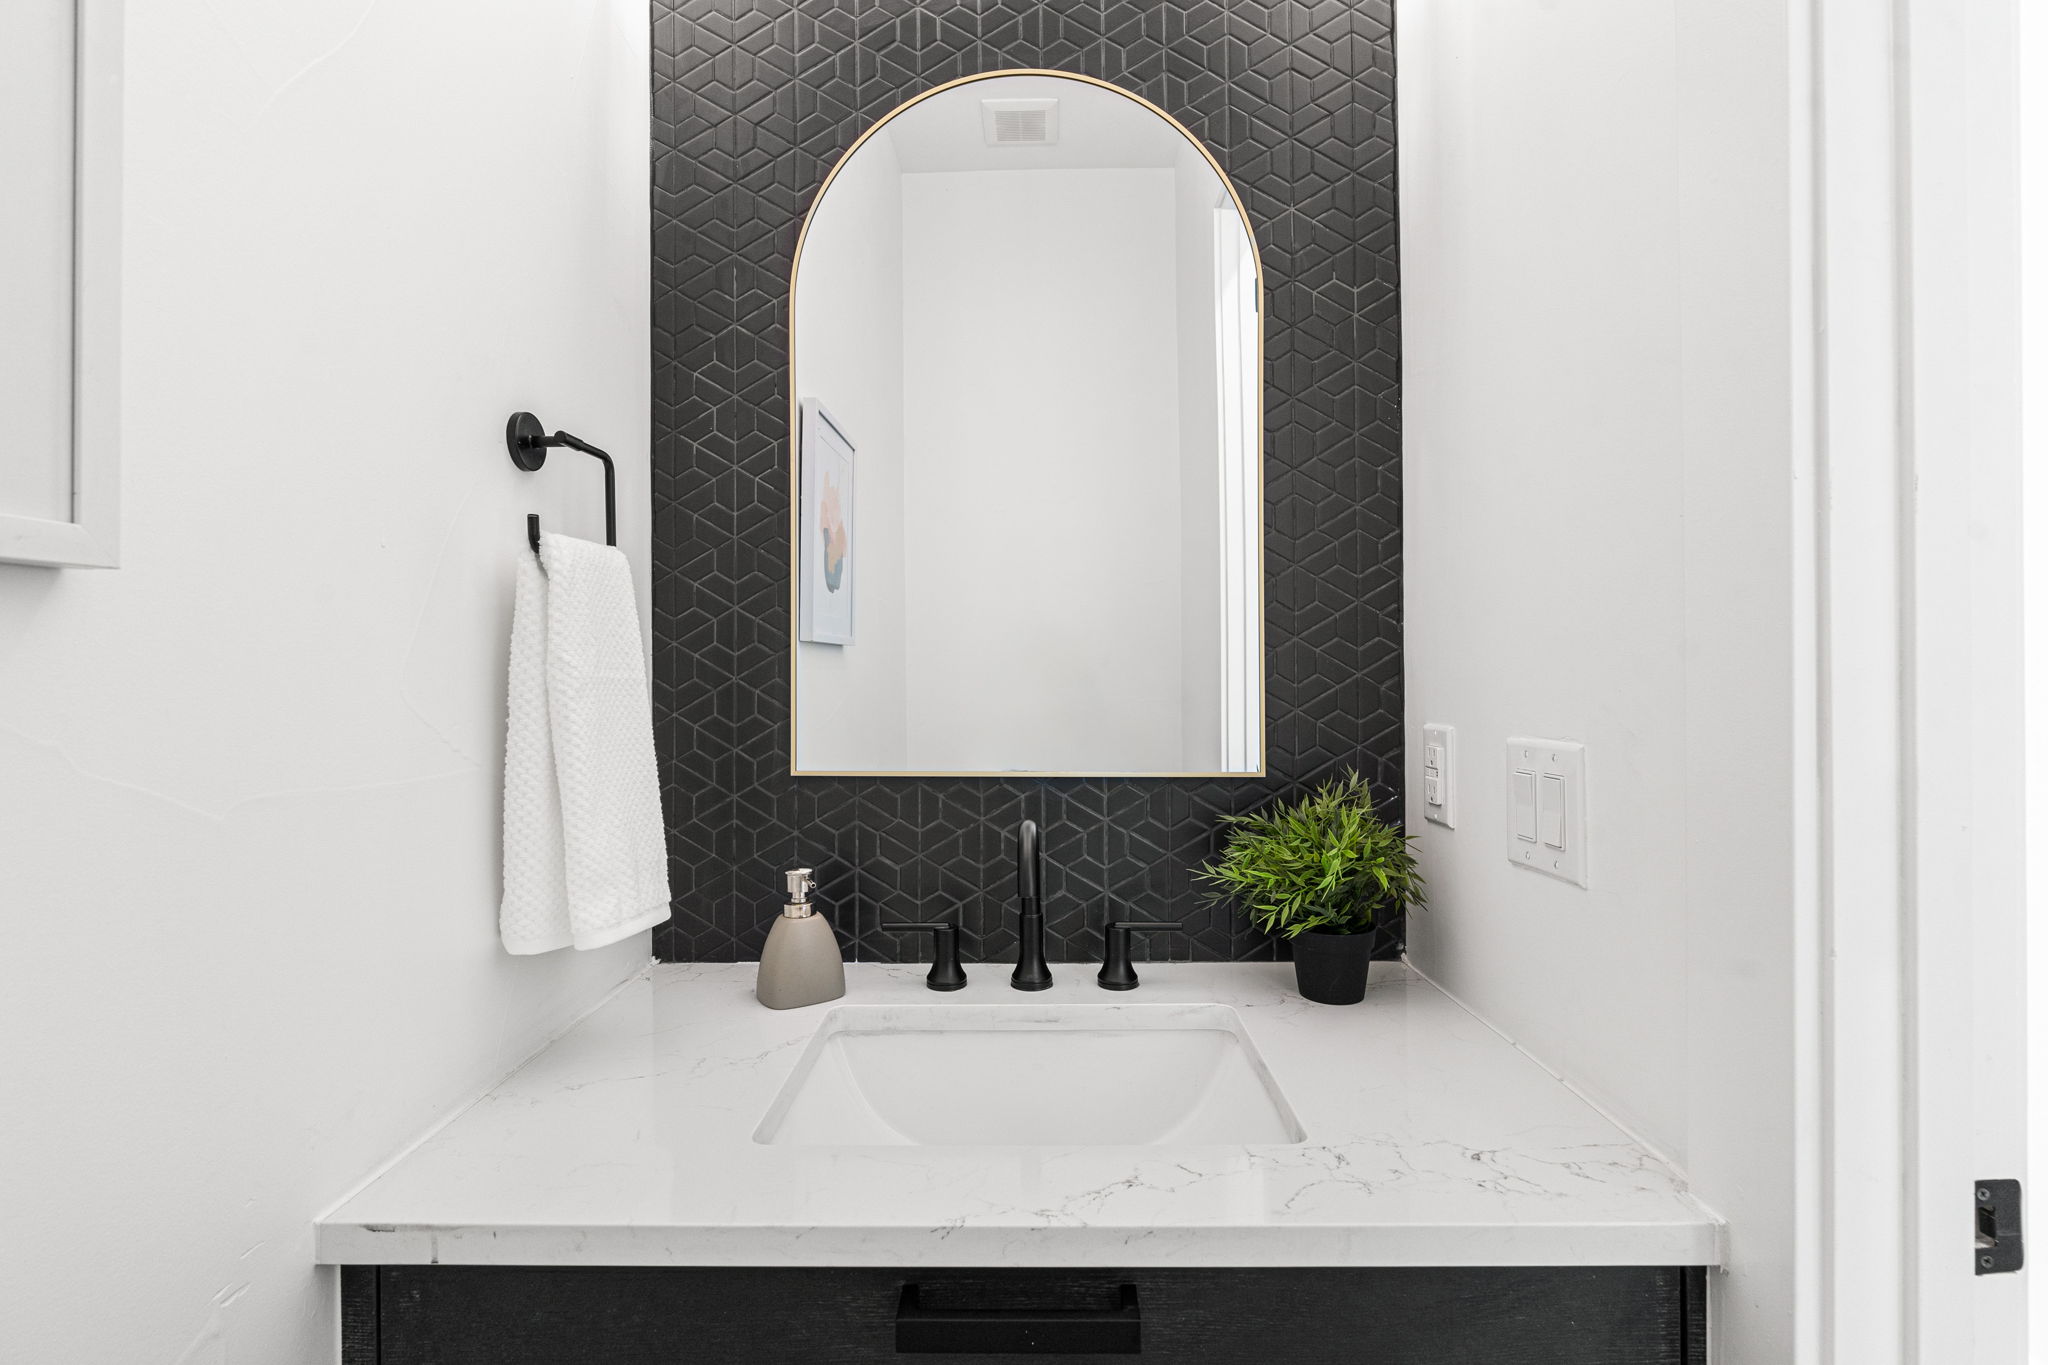 Chic powder room design with a standout tile wall.